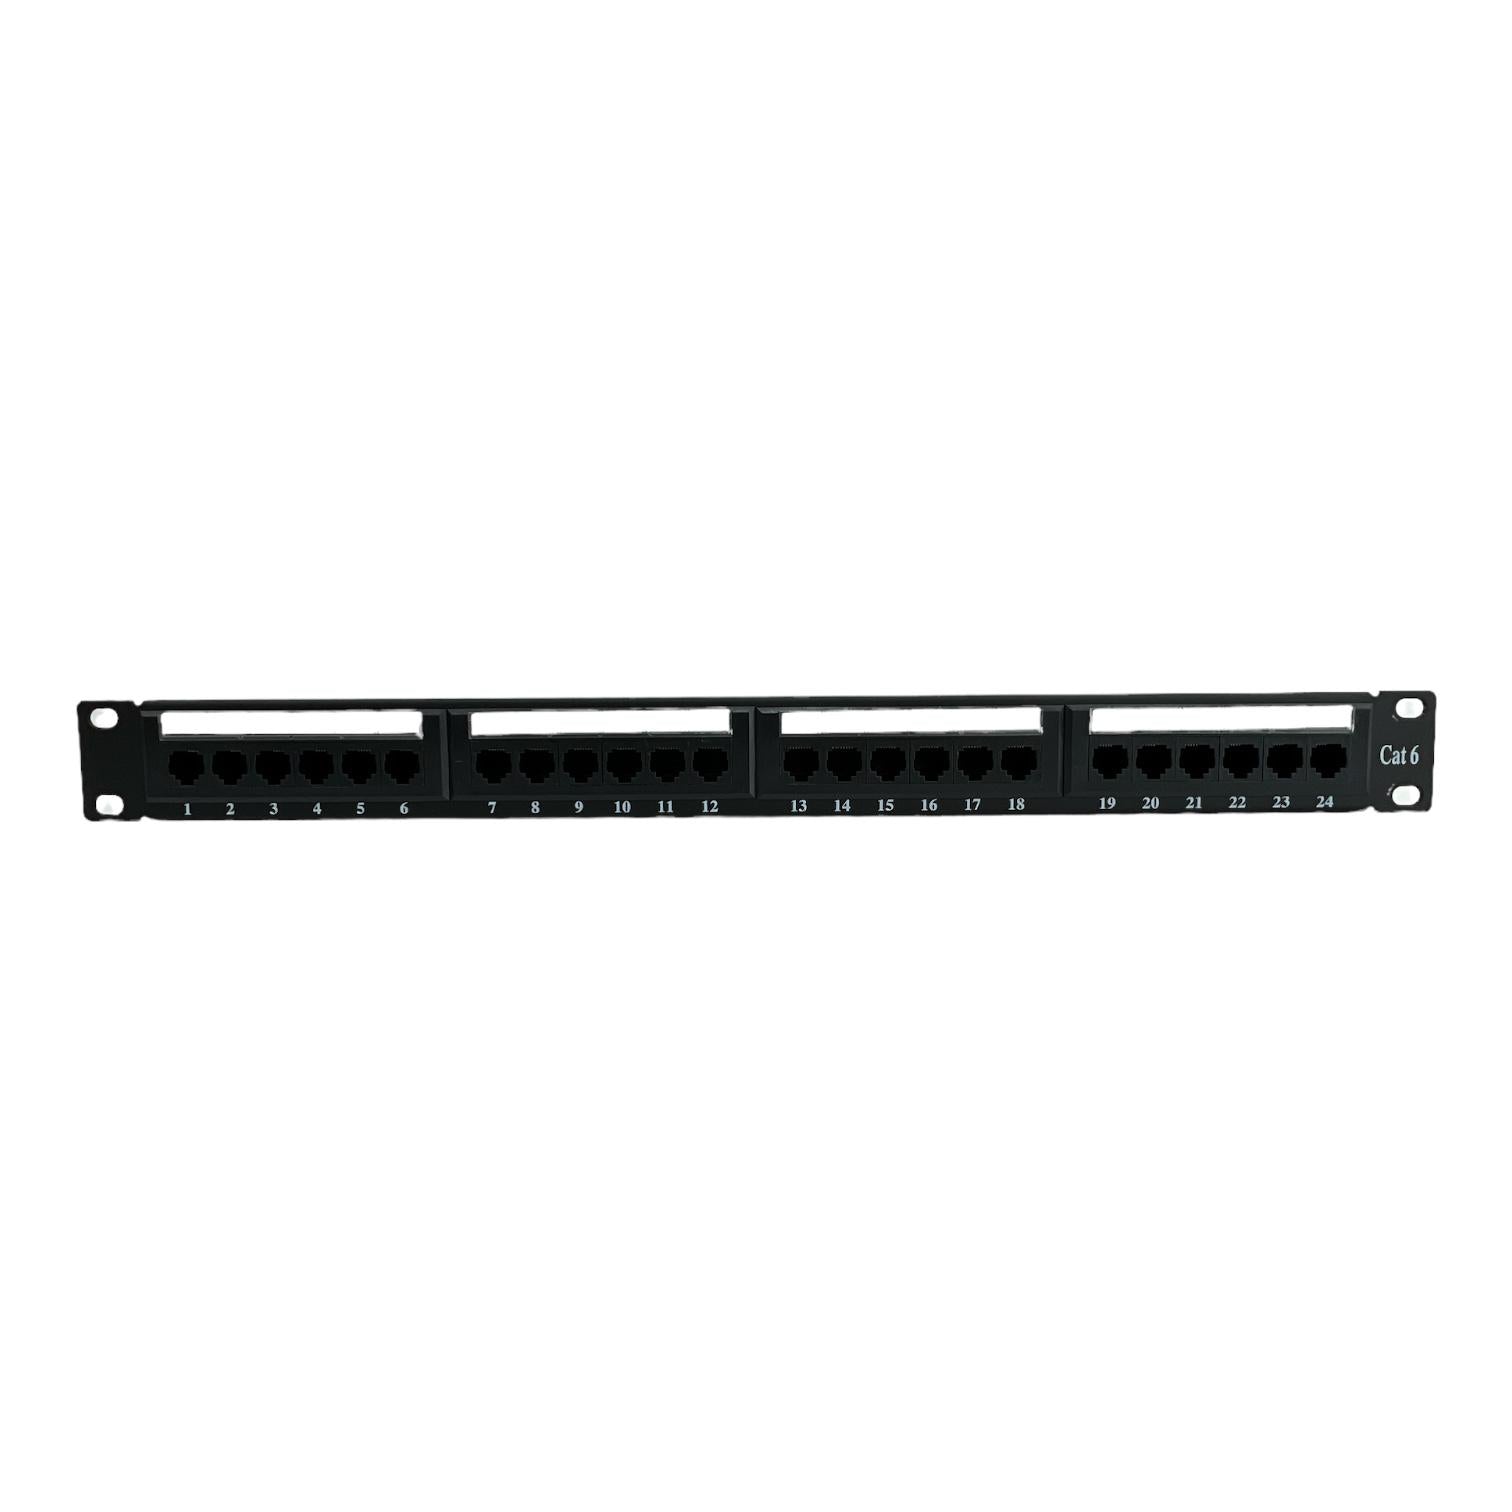 24 port patch panel cat6 with screws